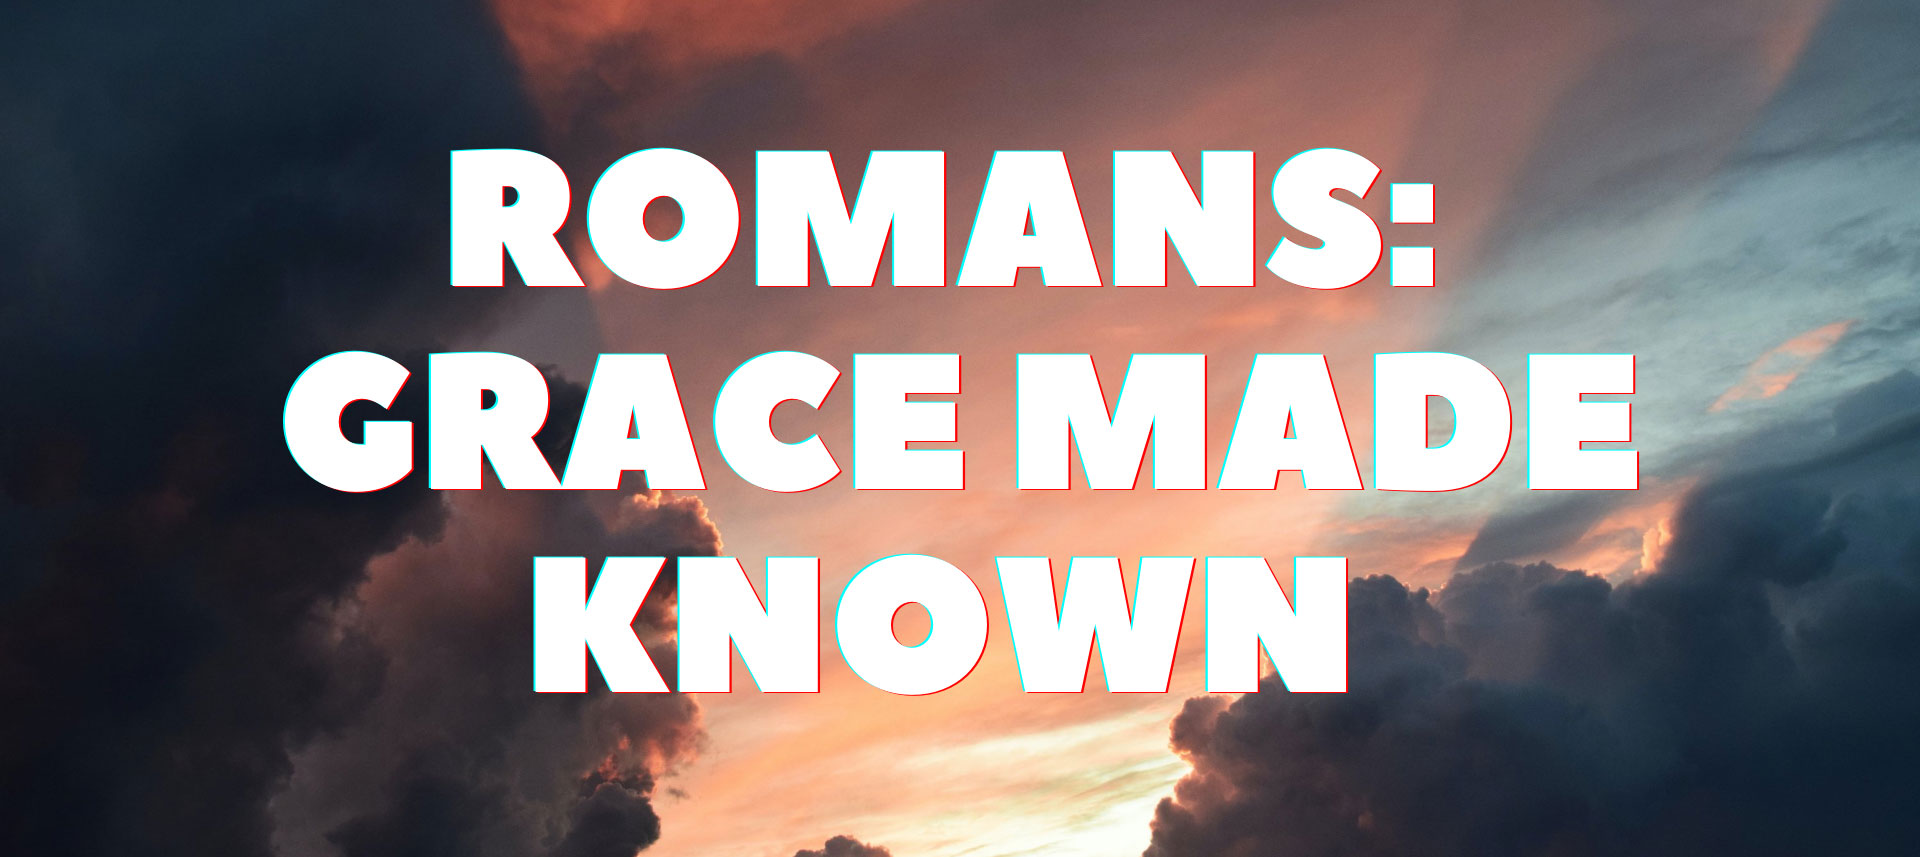 Romans - Grace Made Known